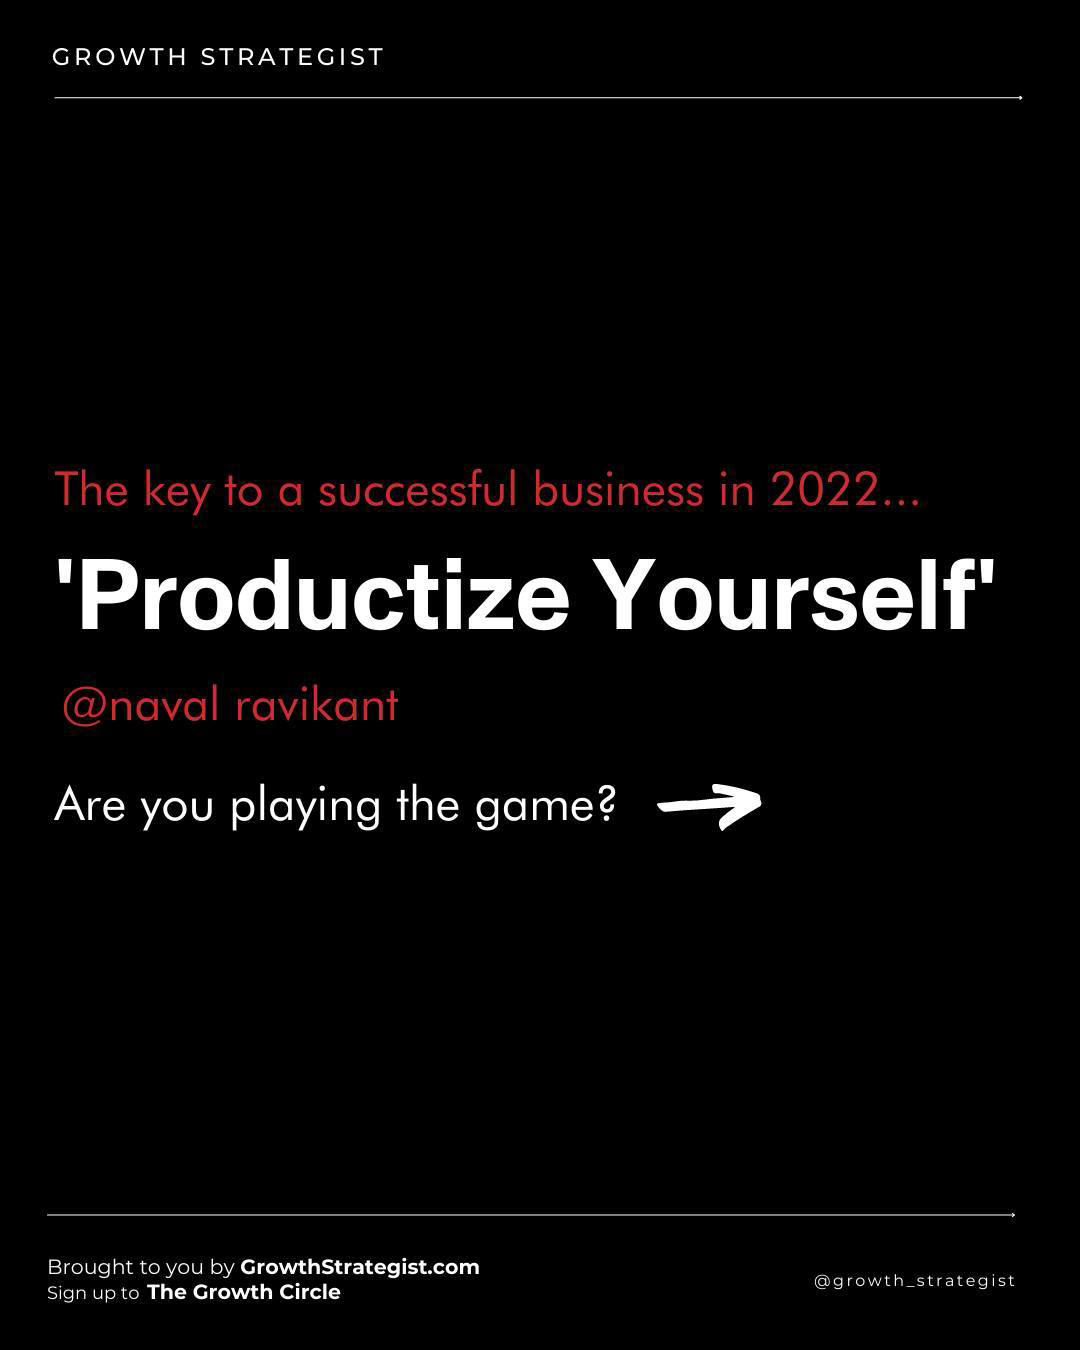 Growth Strategist - “Productize yourself“ - #NavalRavikant  To be successful in business, we need to